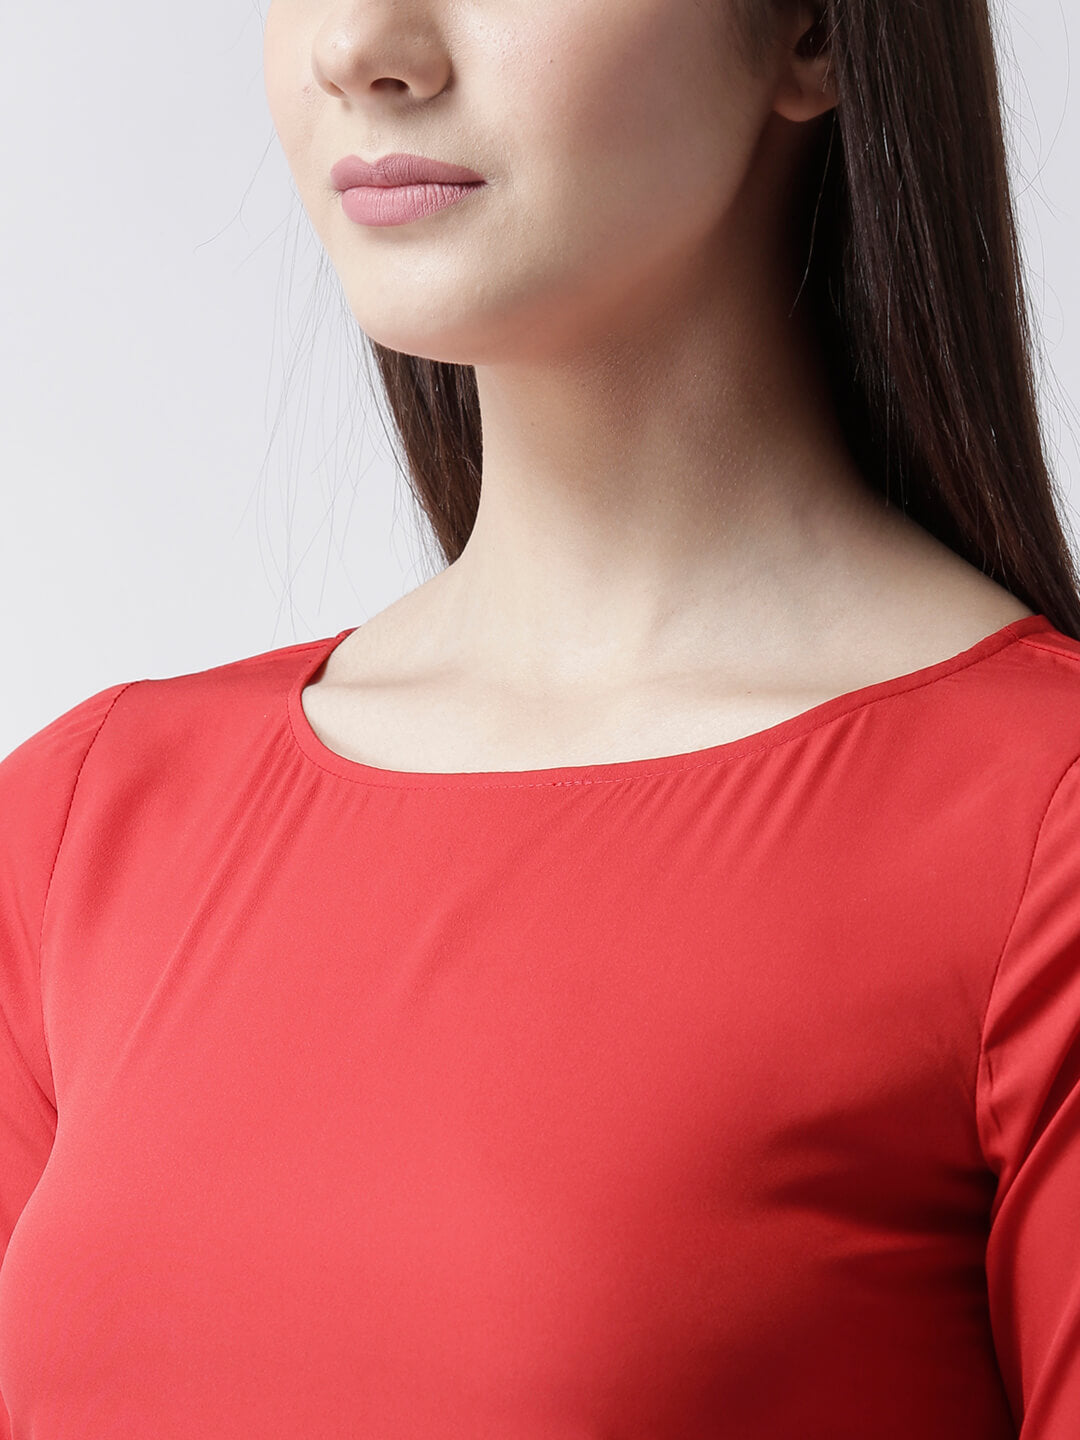 Msfq Women'S Solid Red Flared Sleeve Top